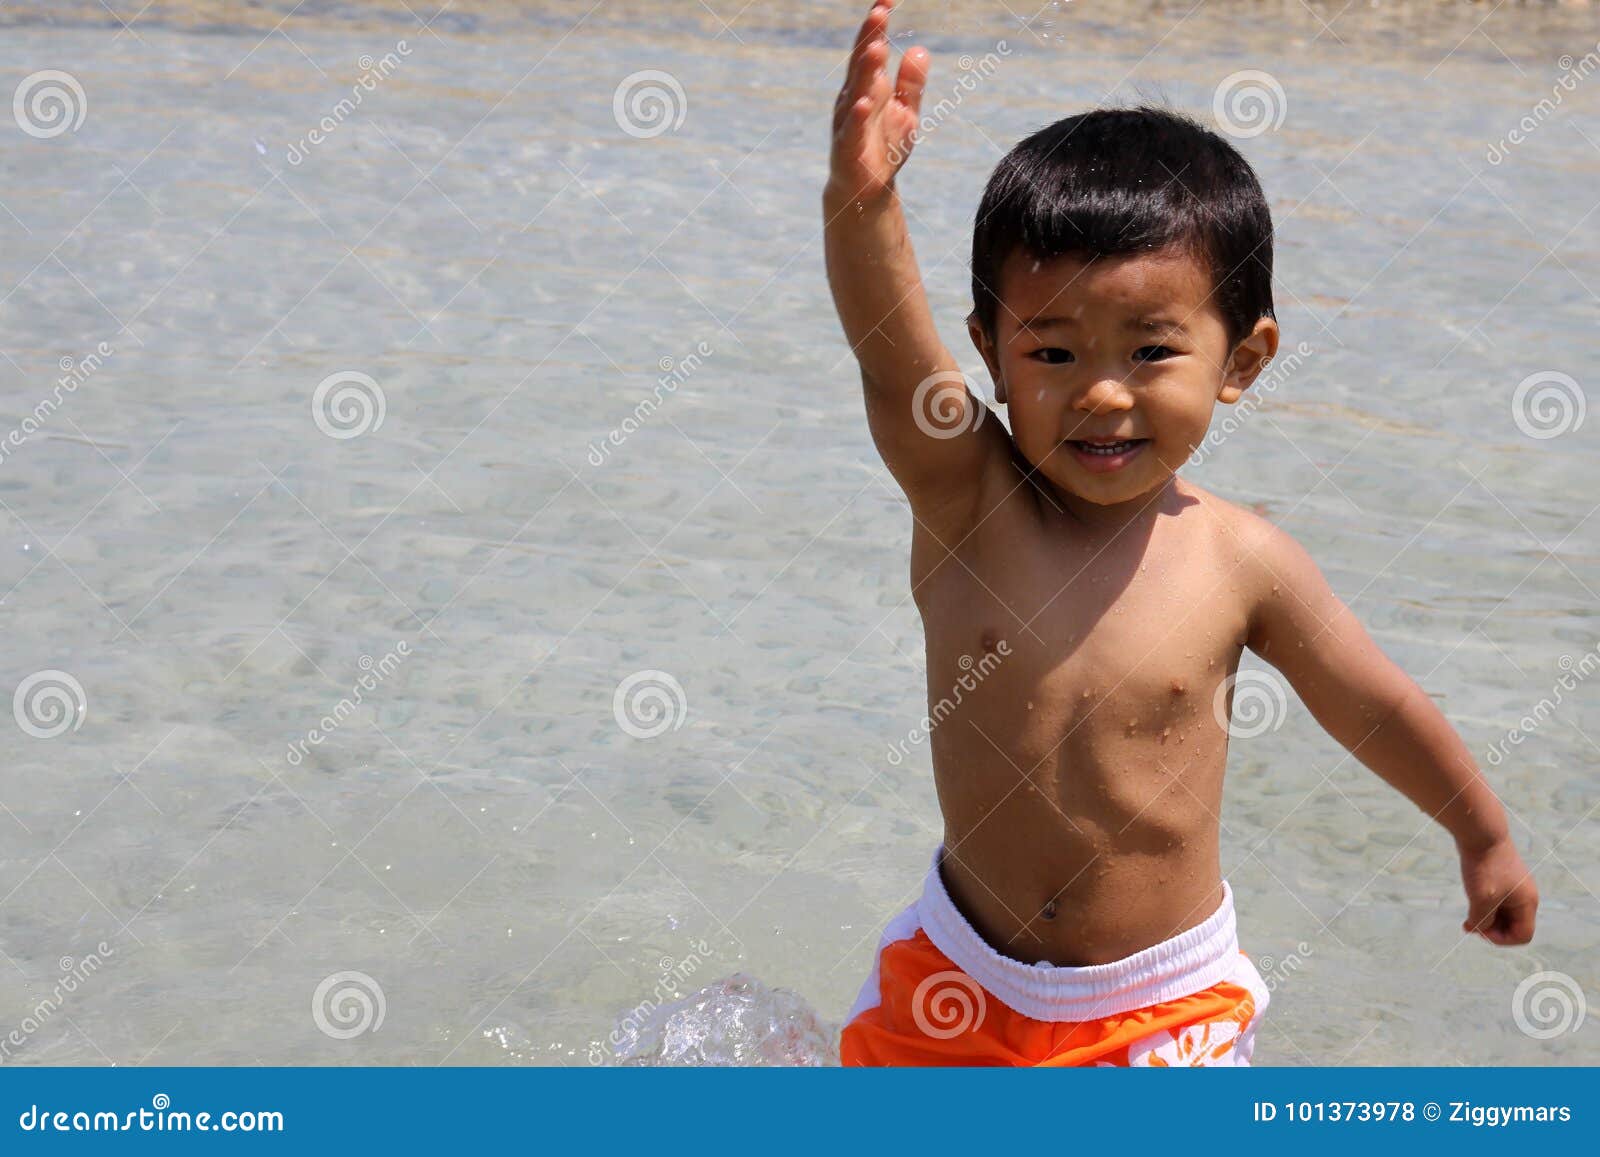 Child Water Sky Sun Summer - a Royalty Free Stock Photo 